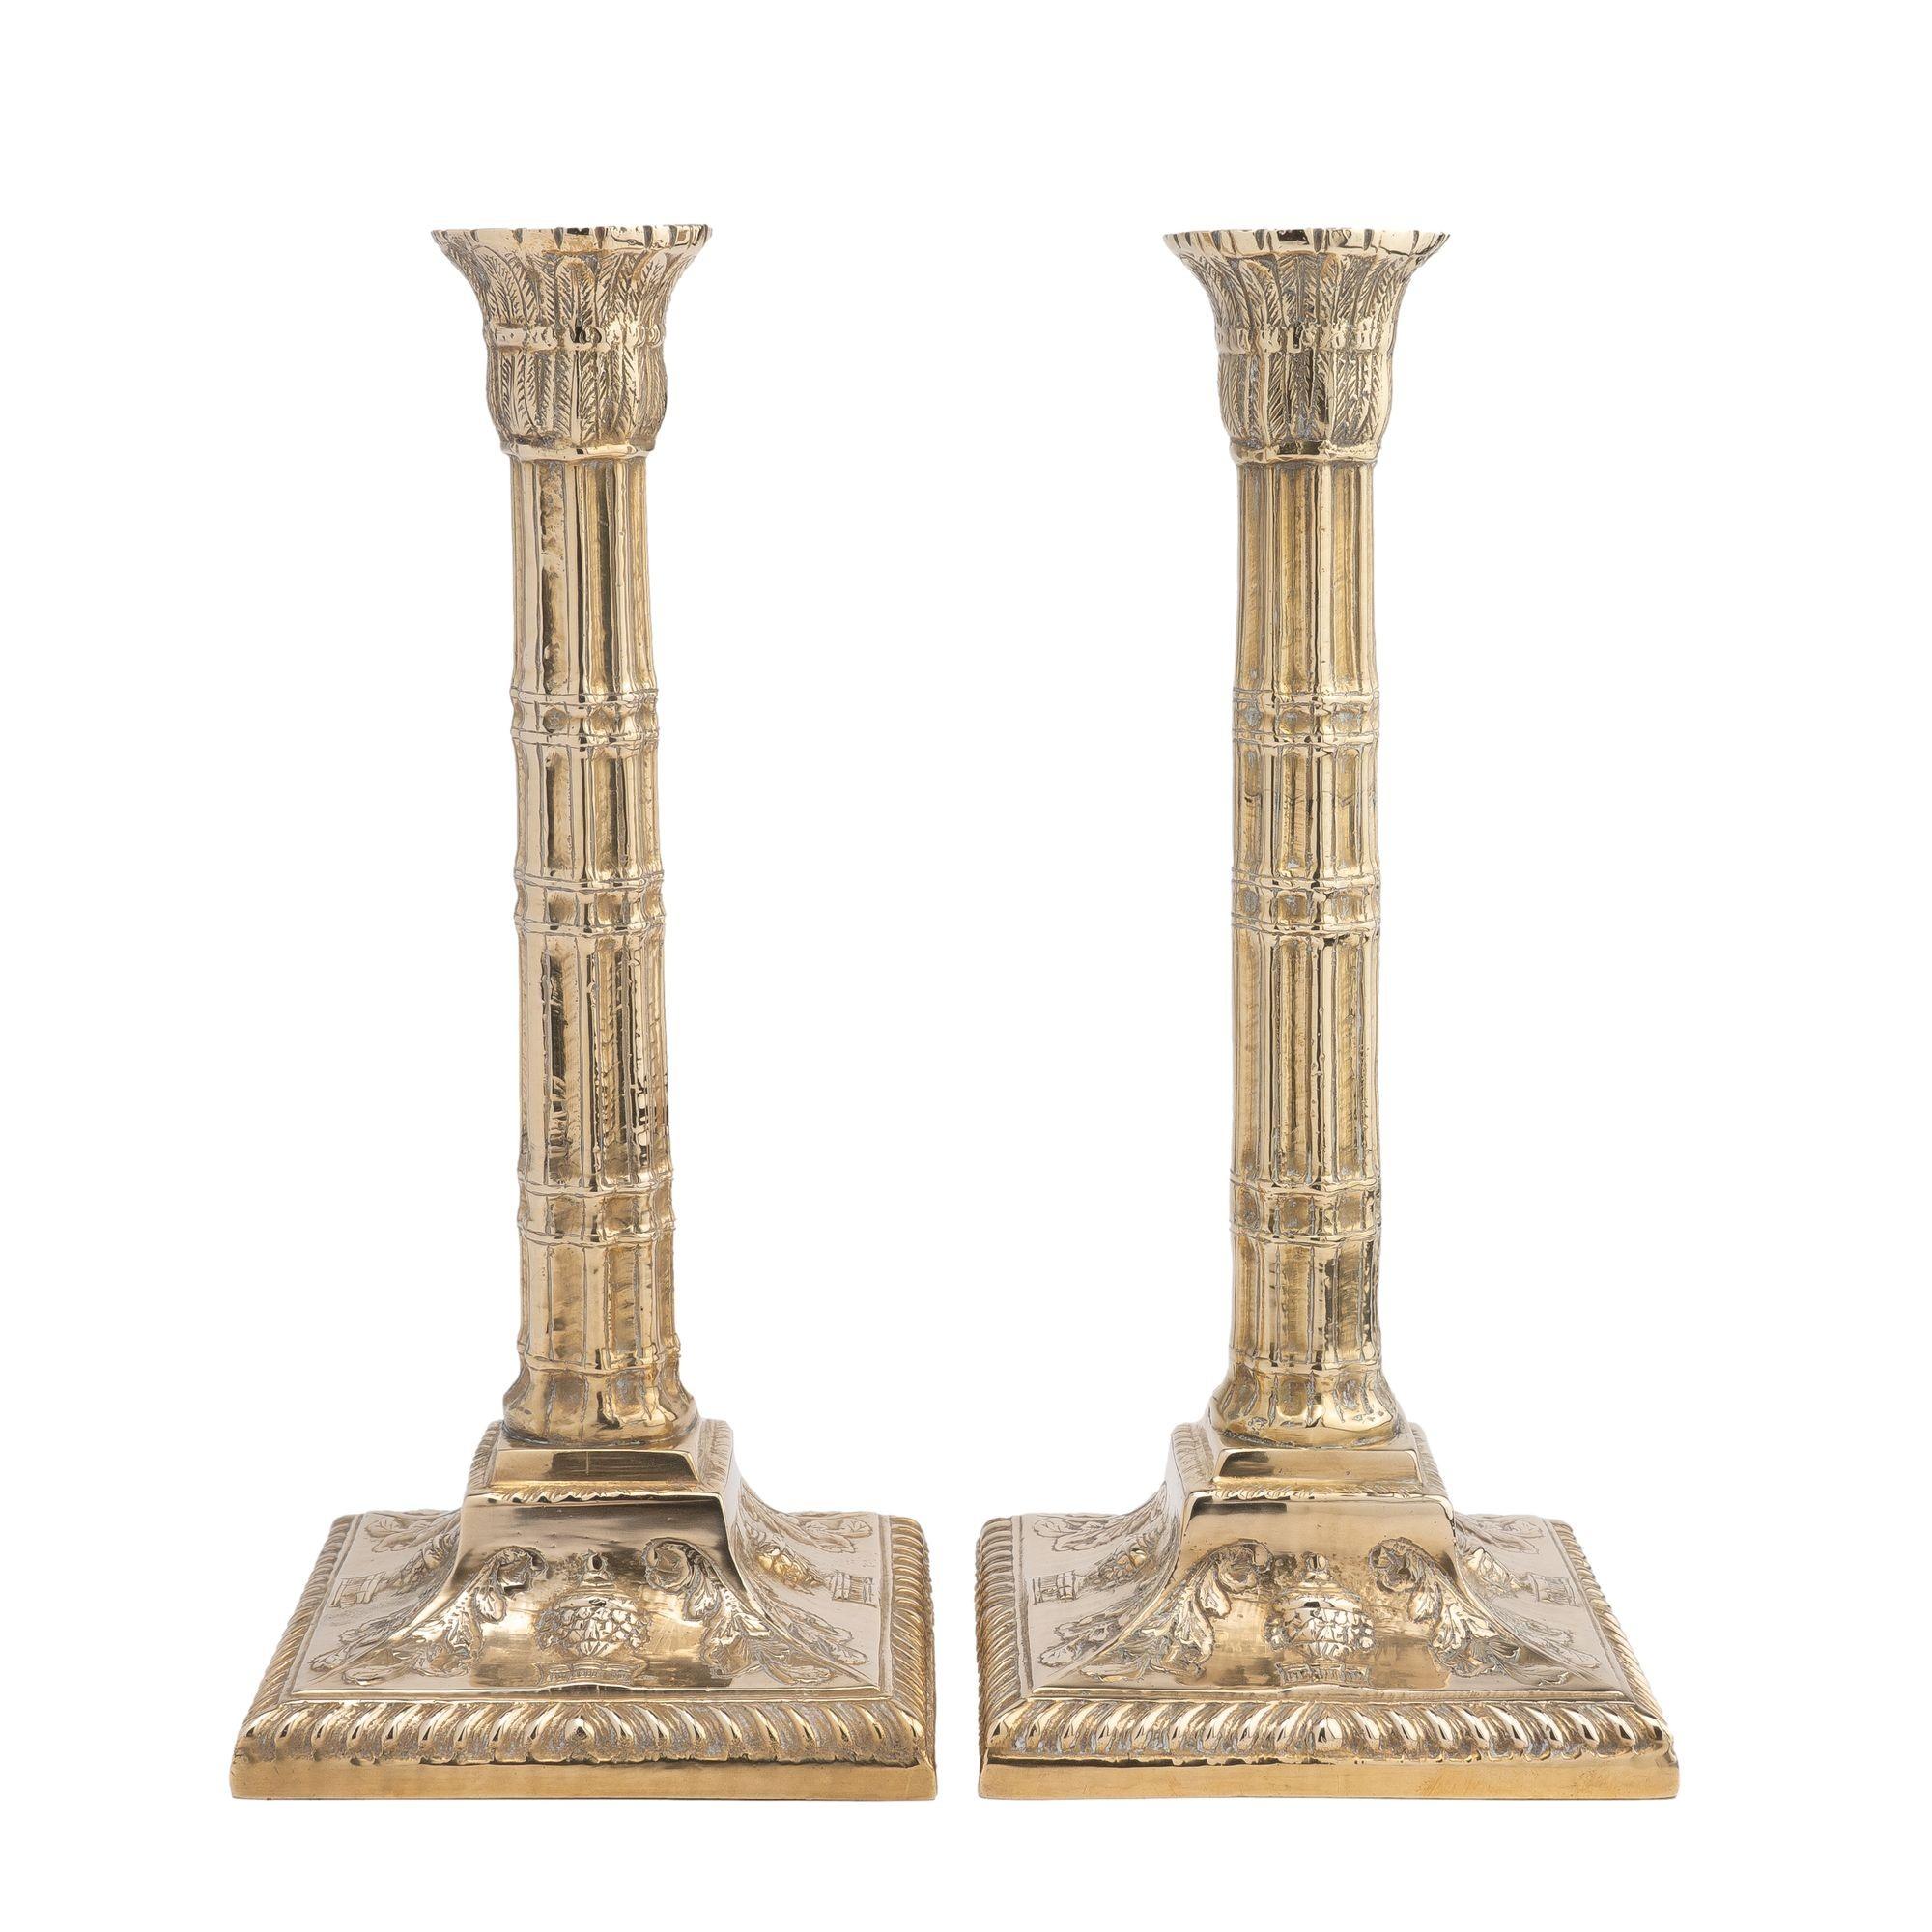 Pair of cast hardened white brass candlesticks in patented Martinoid. The acanthus leaf capital is supported by a cluster column on a square gadroon edged base. Cast from an 18th century English Silver model.
Birmingham, England, third quarter 19th